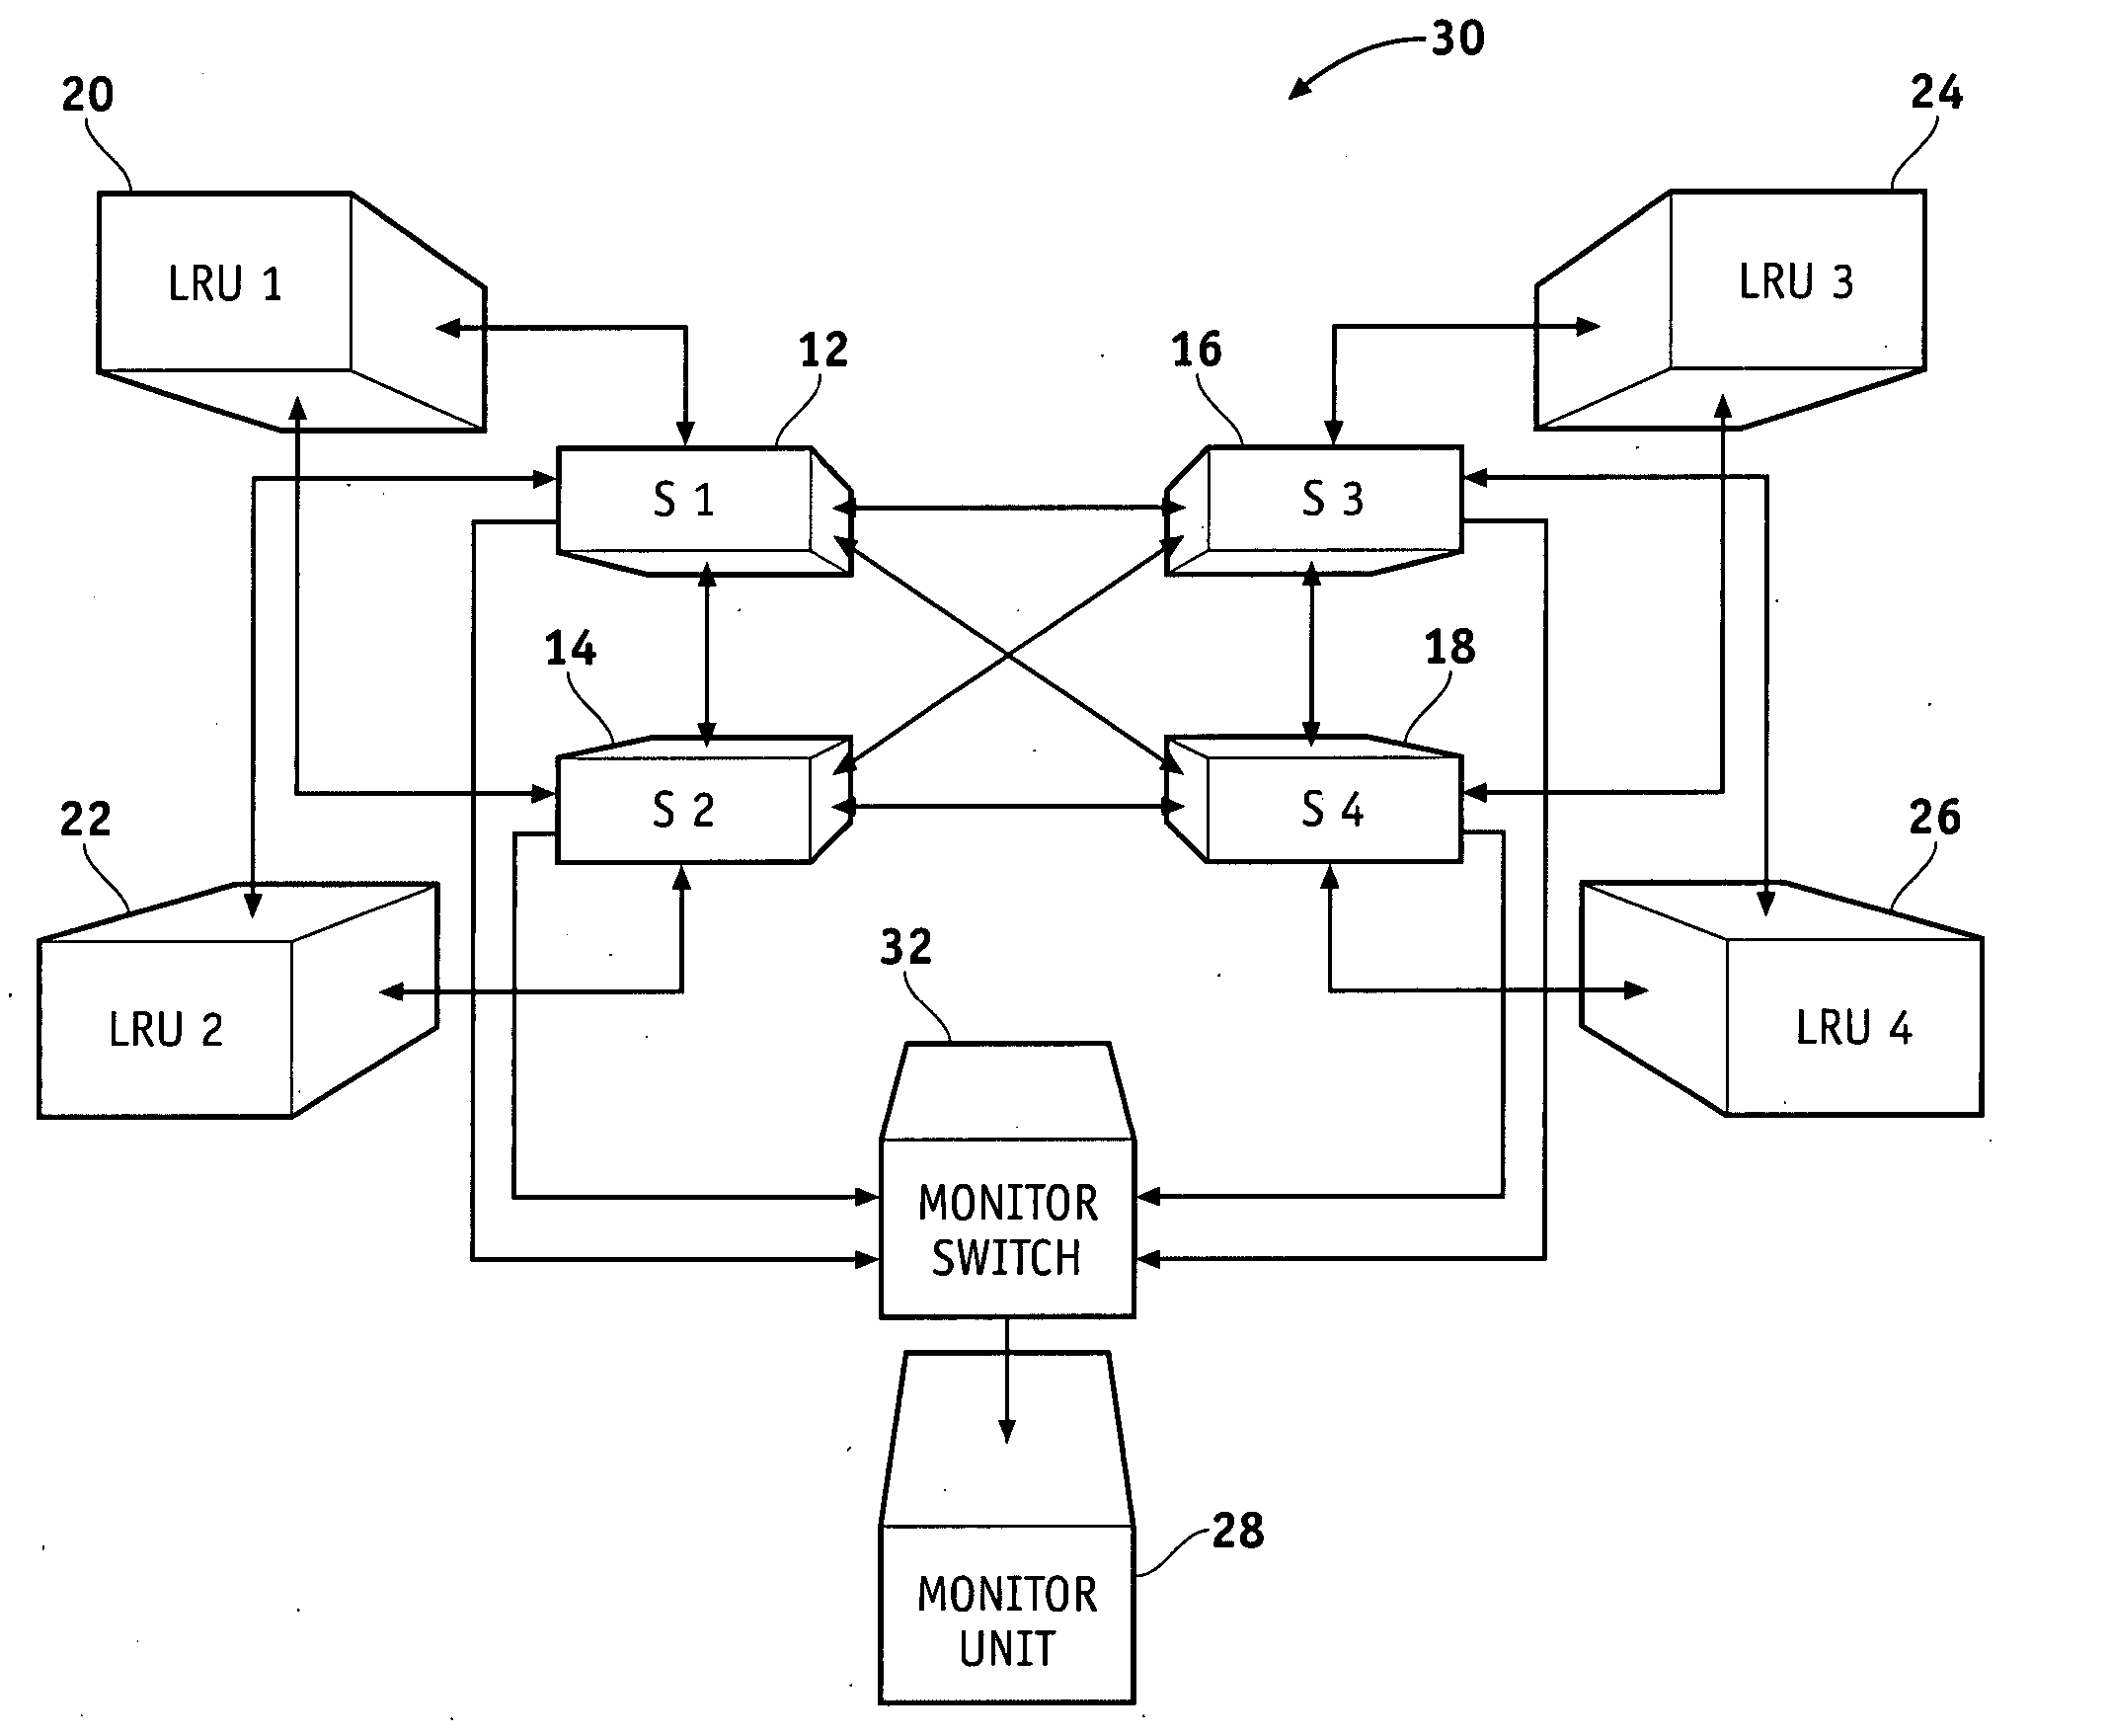 System and method for data collection in an avionics network